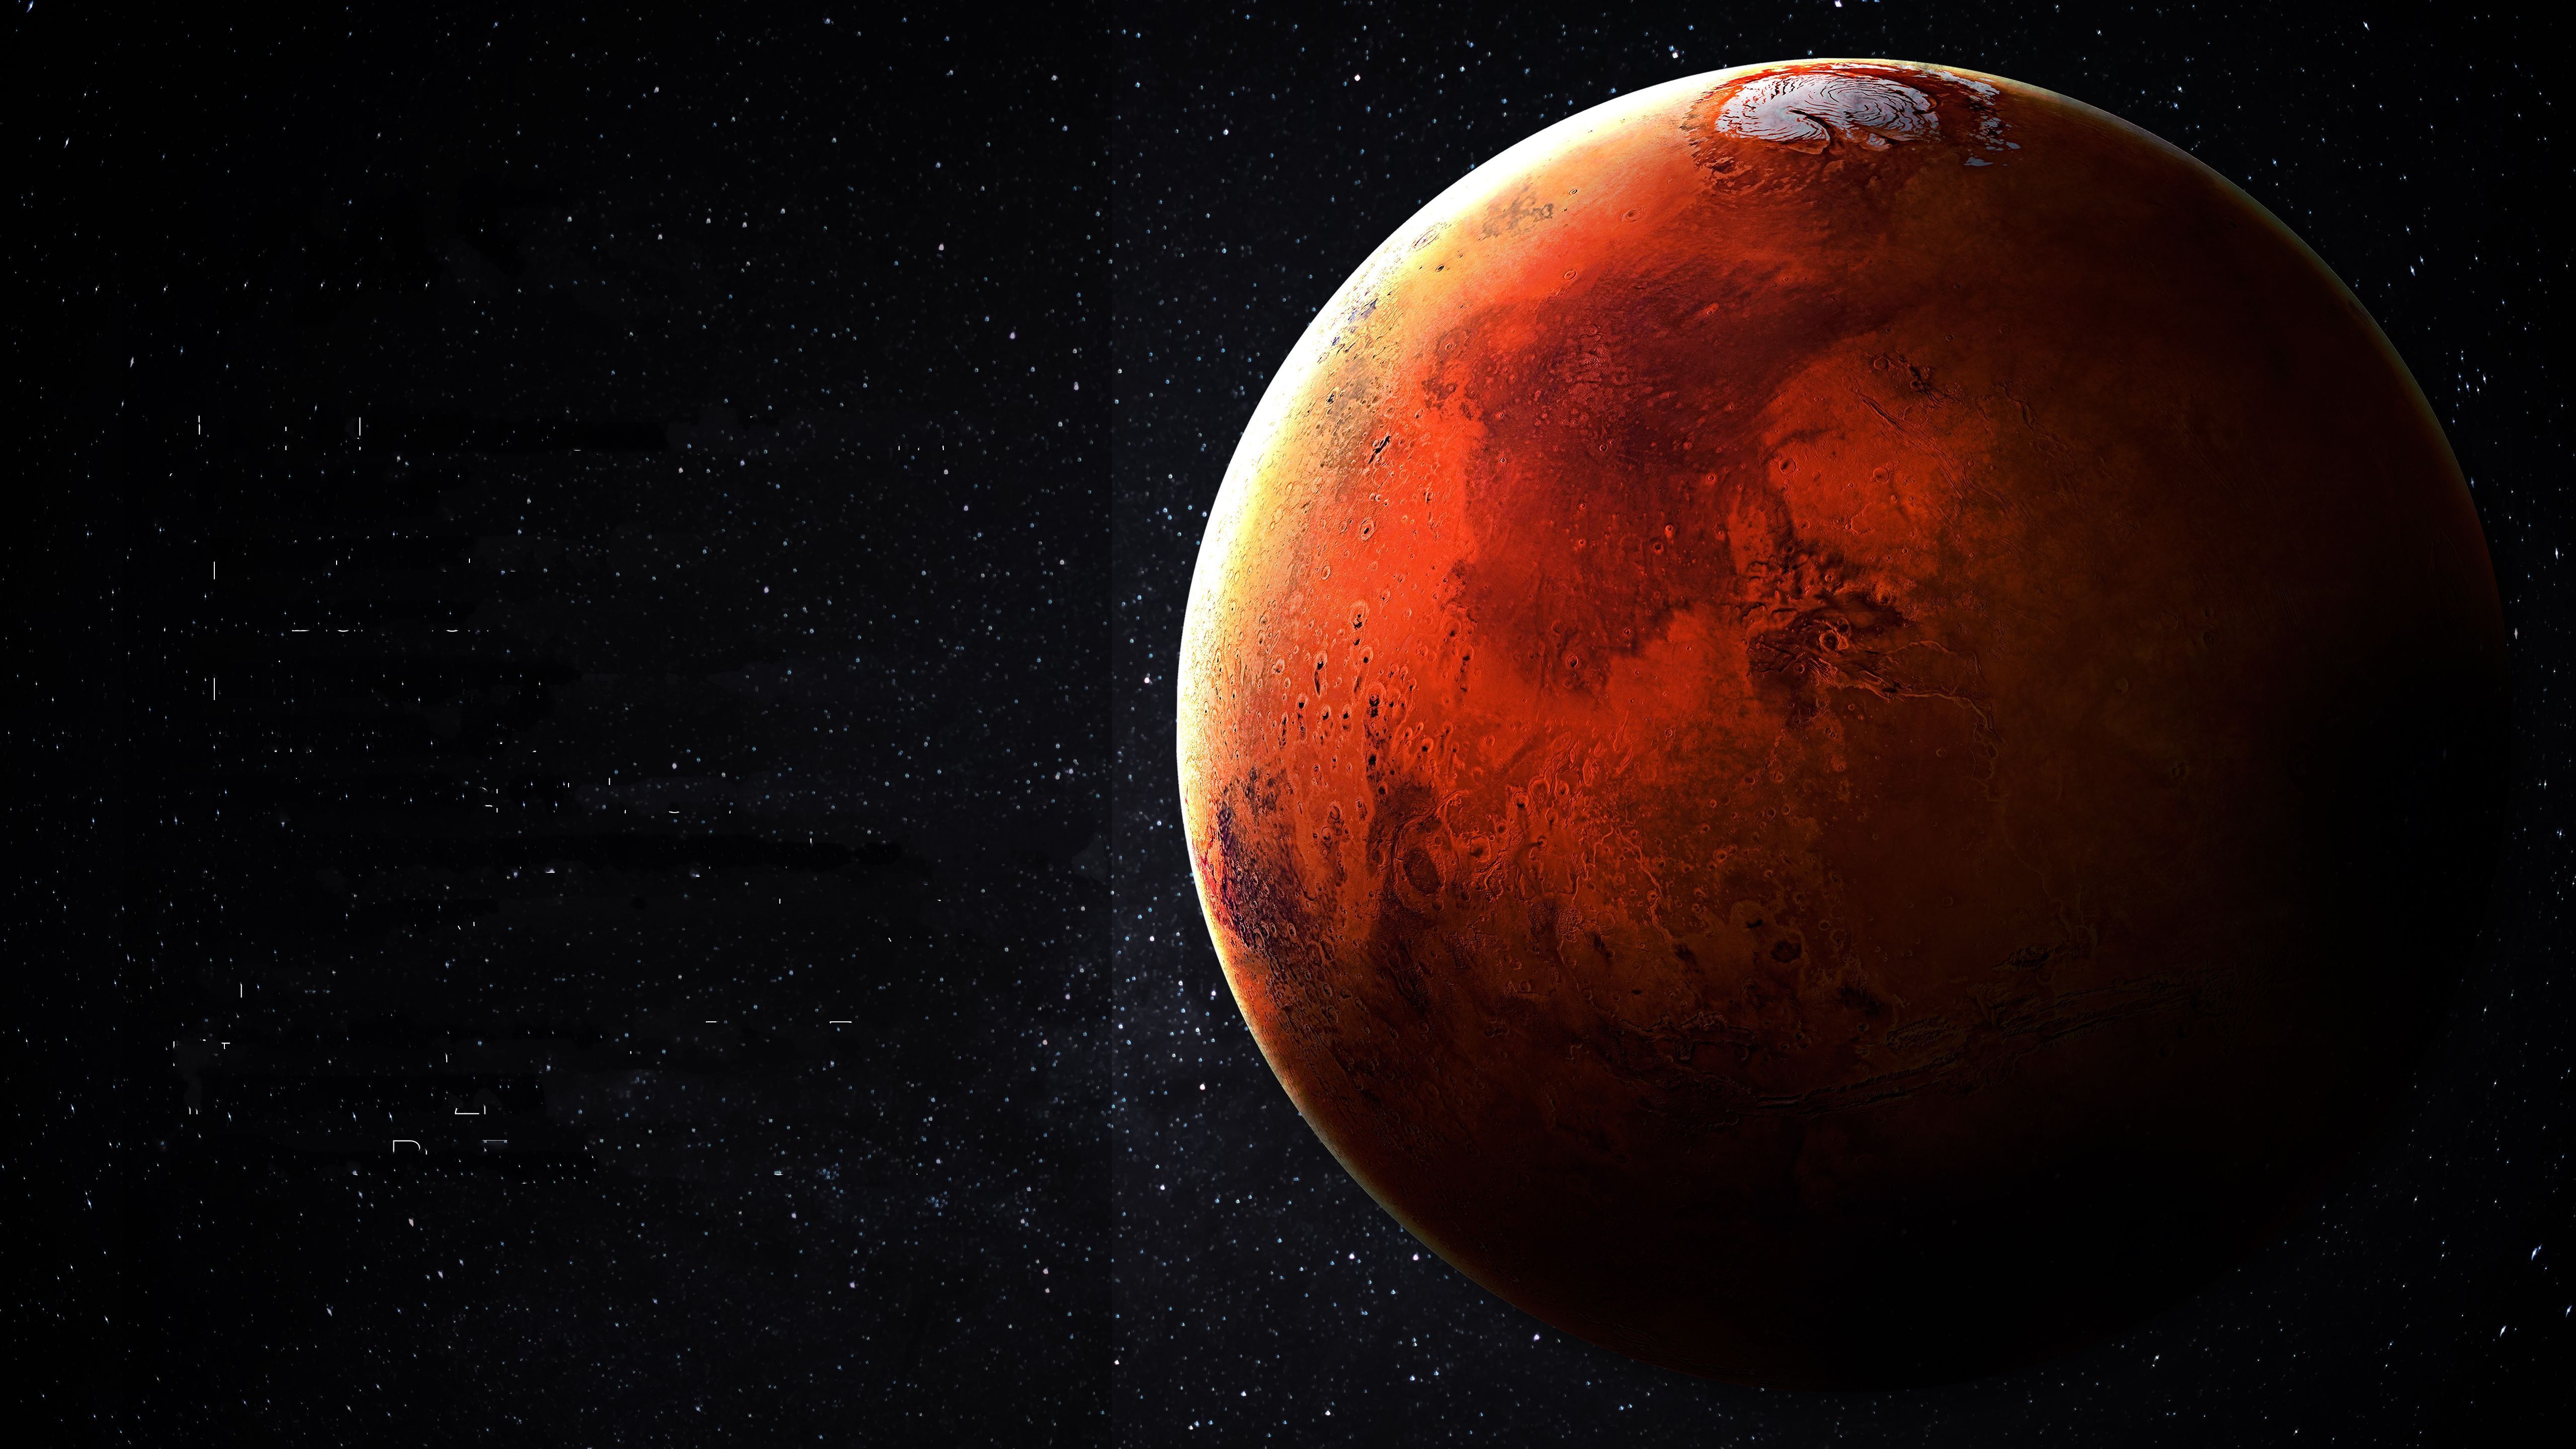 A red planet with an orange surface - Mars